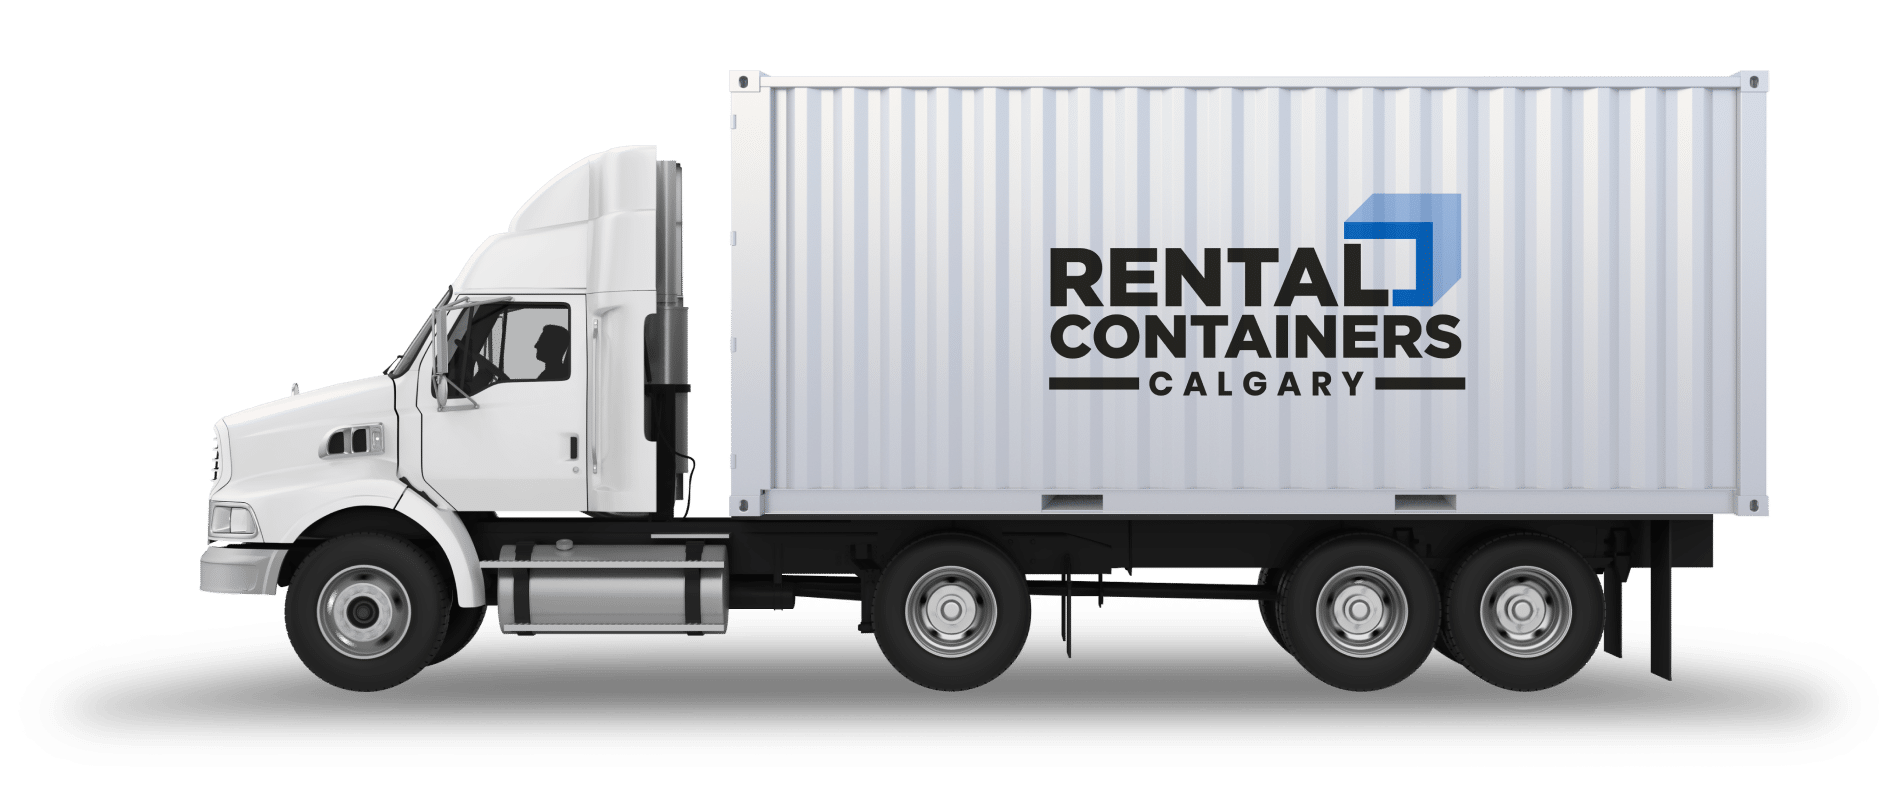 portable storage containers calgary